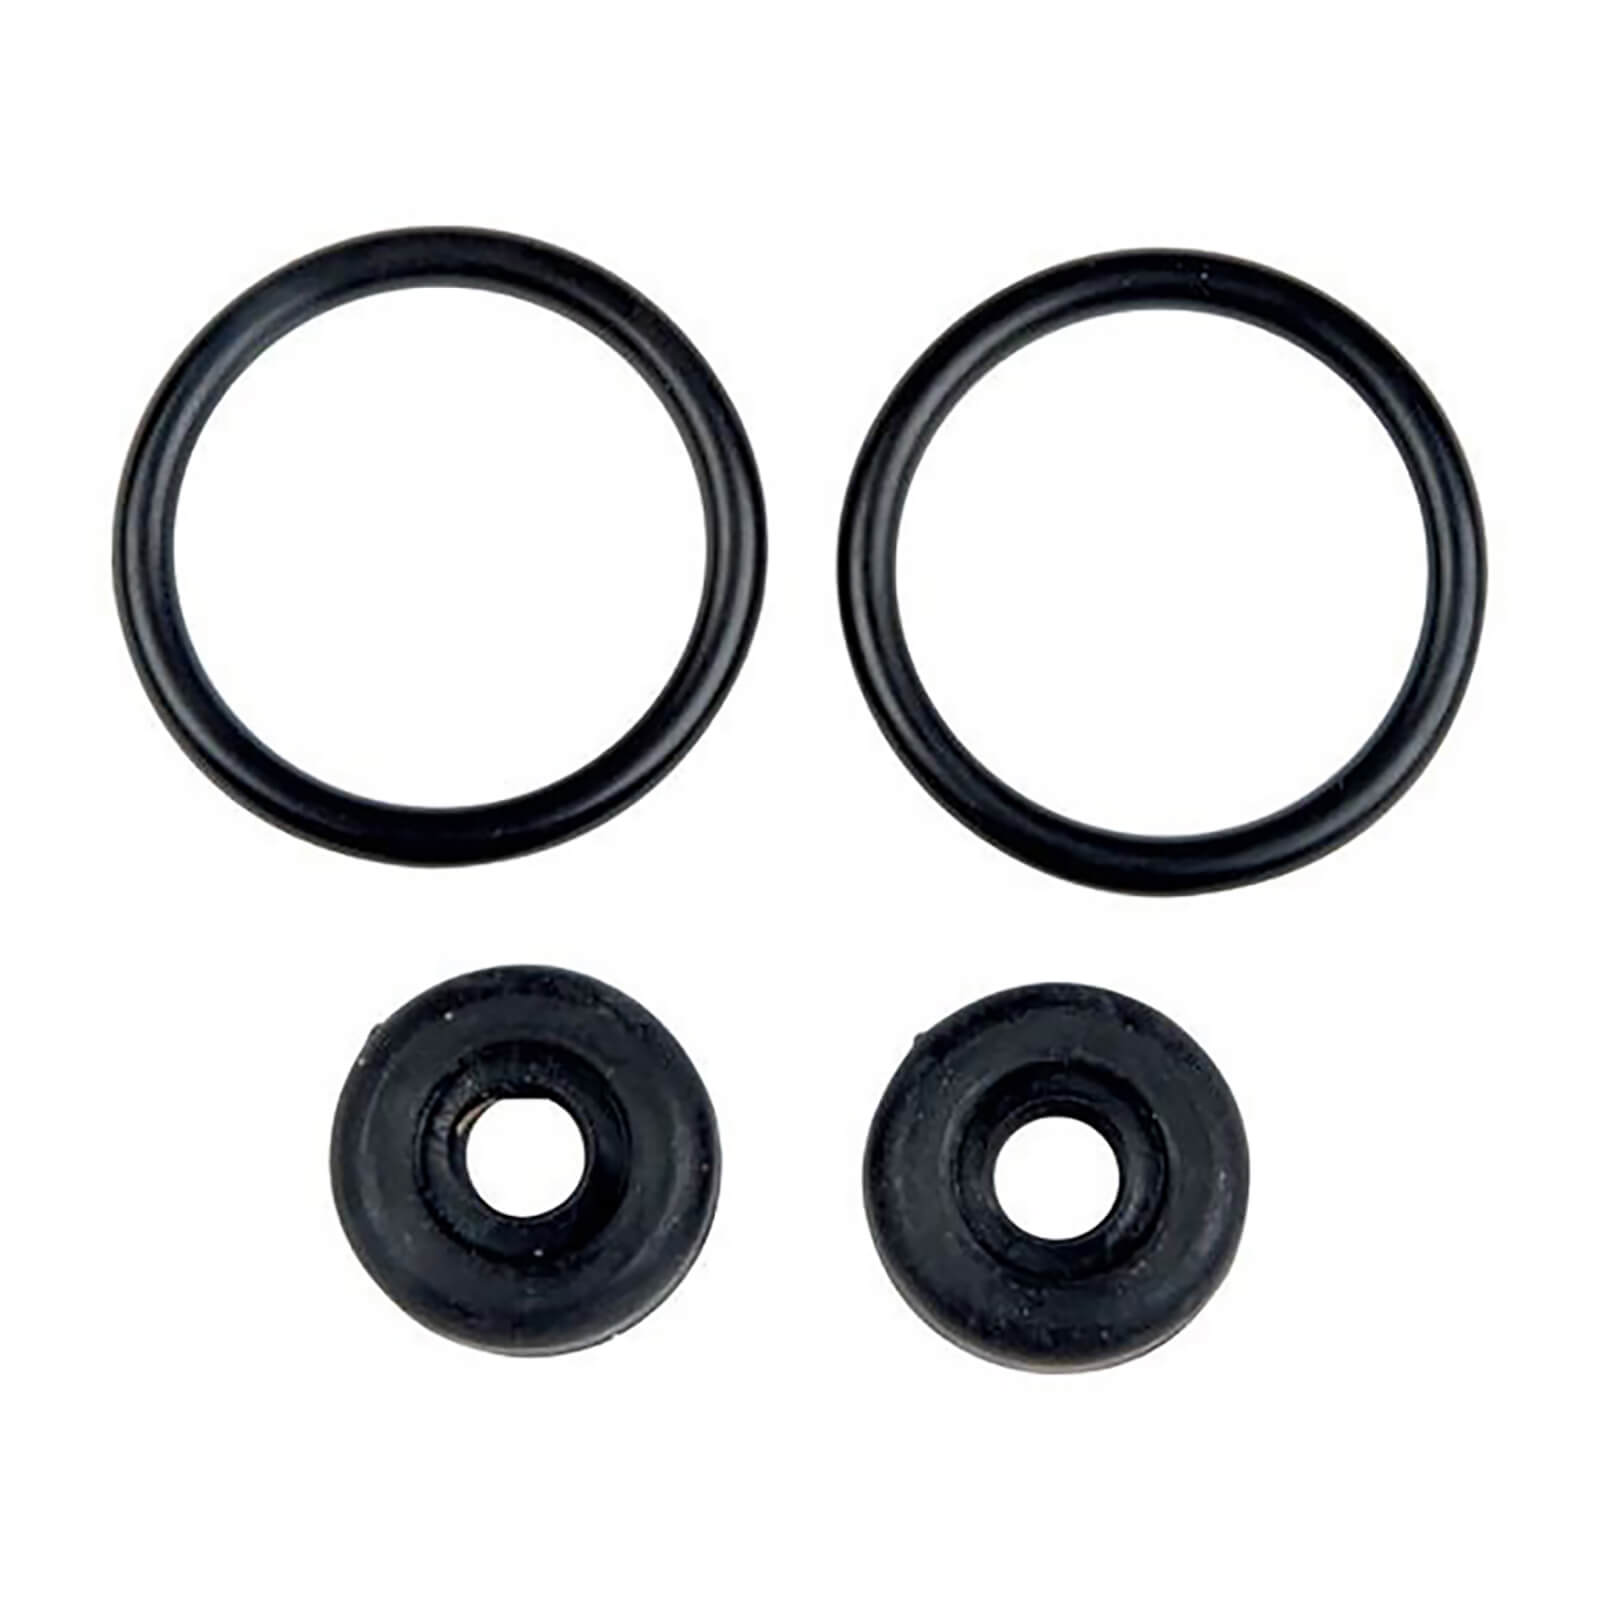 Delta Tap Washers - 13mm - 2 Pack